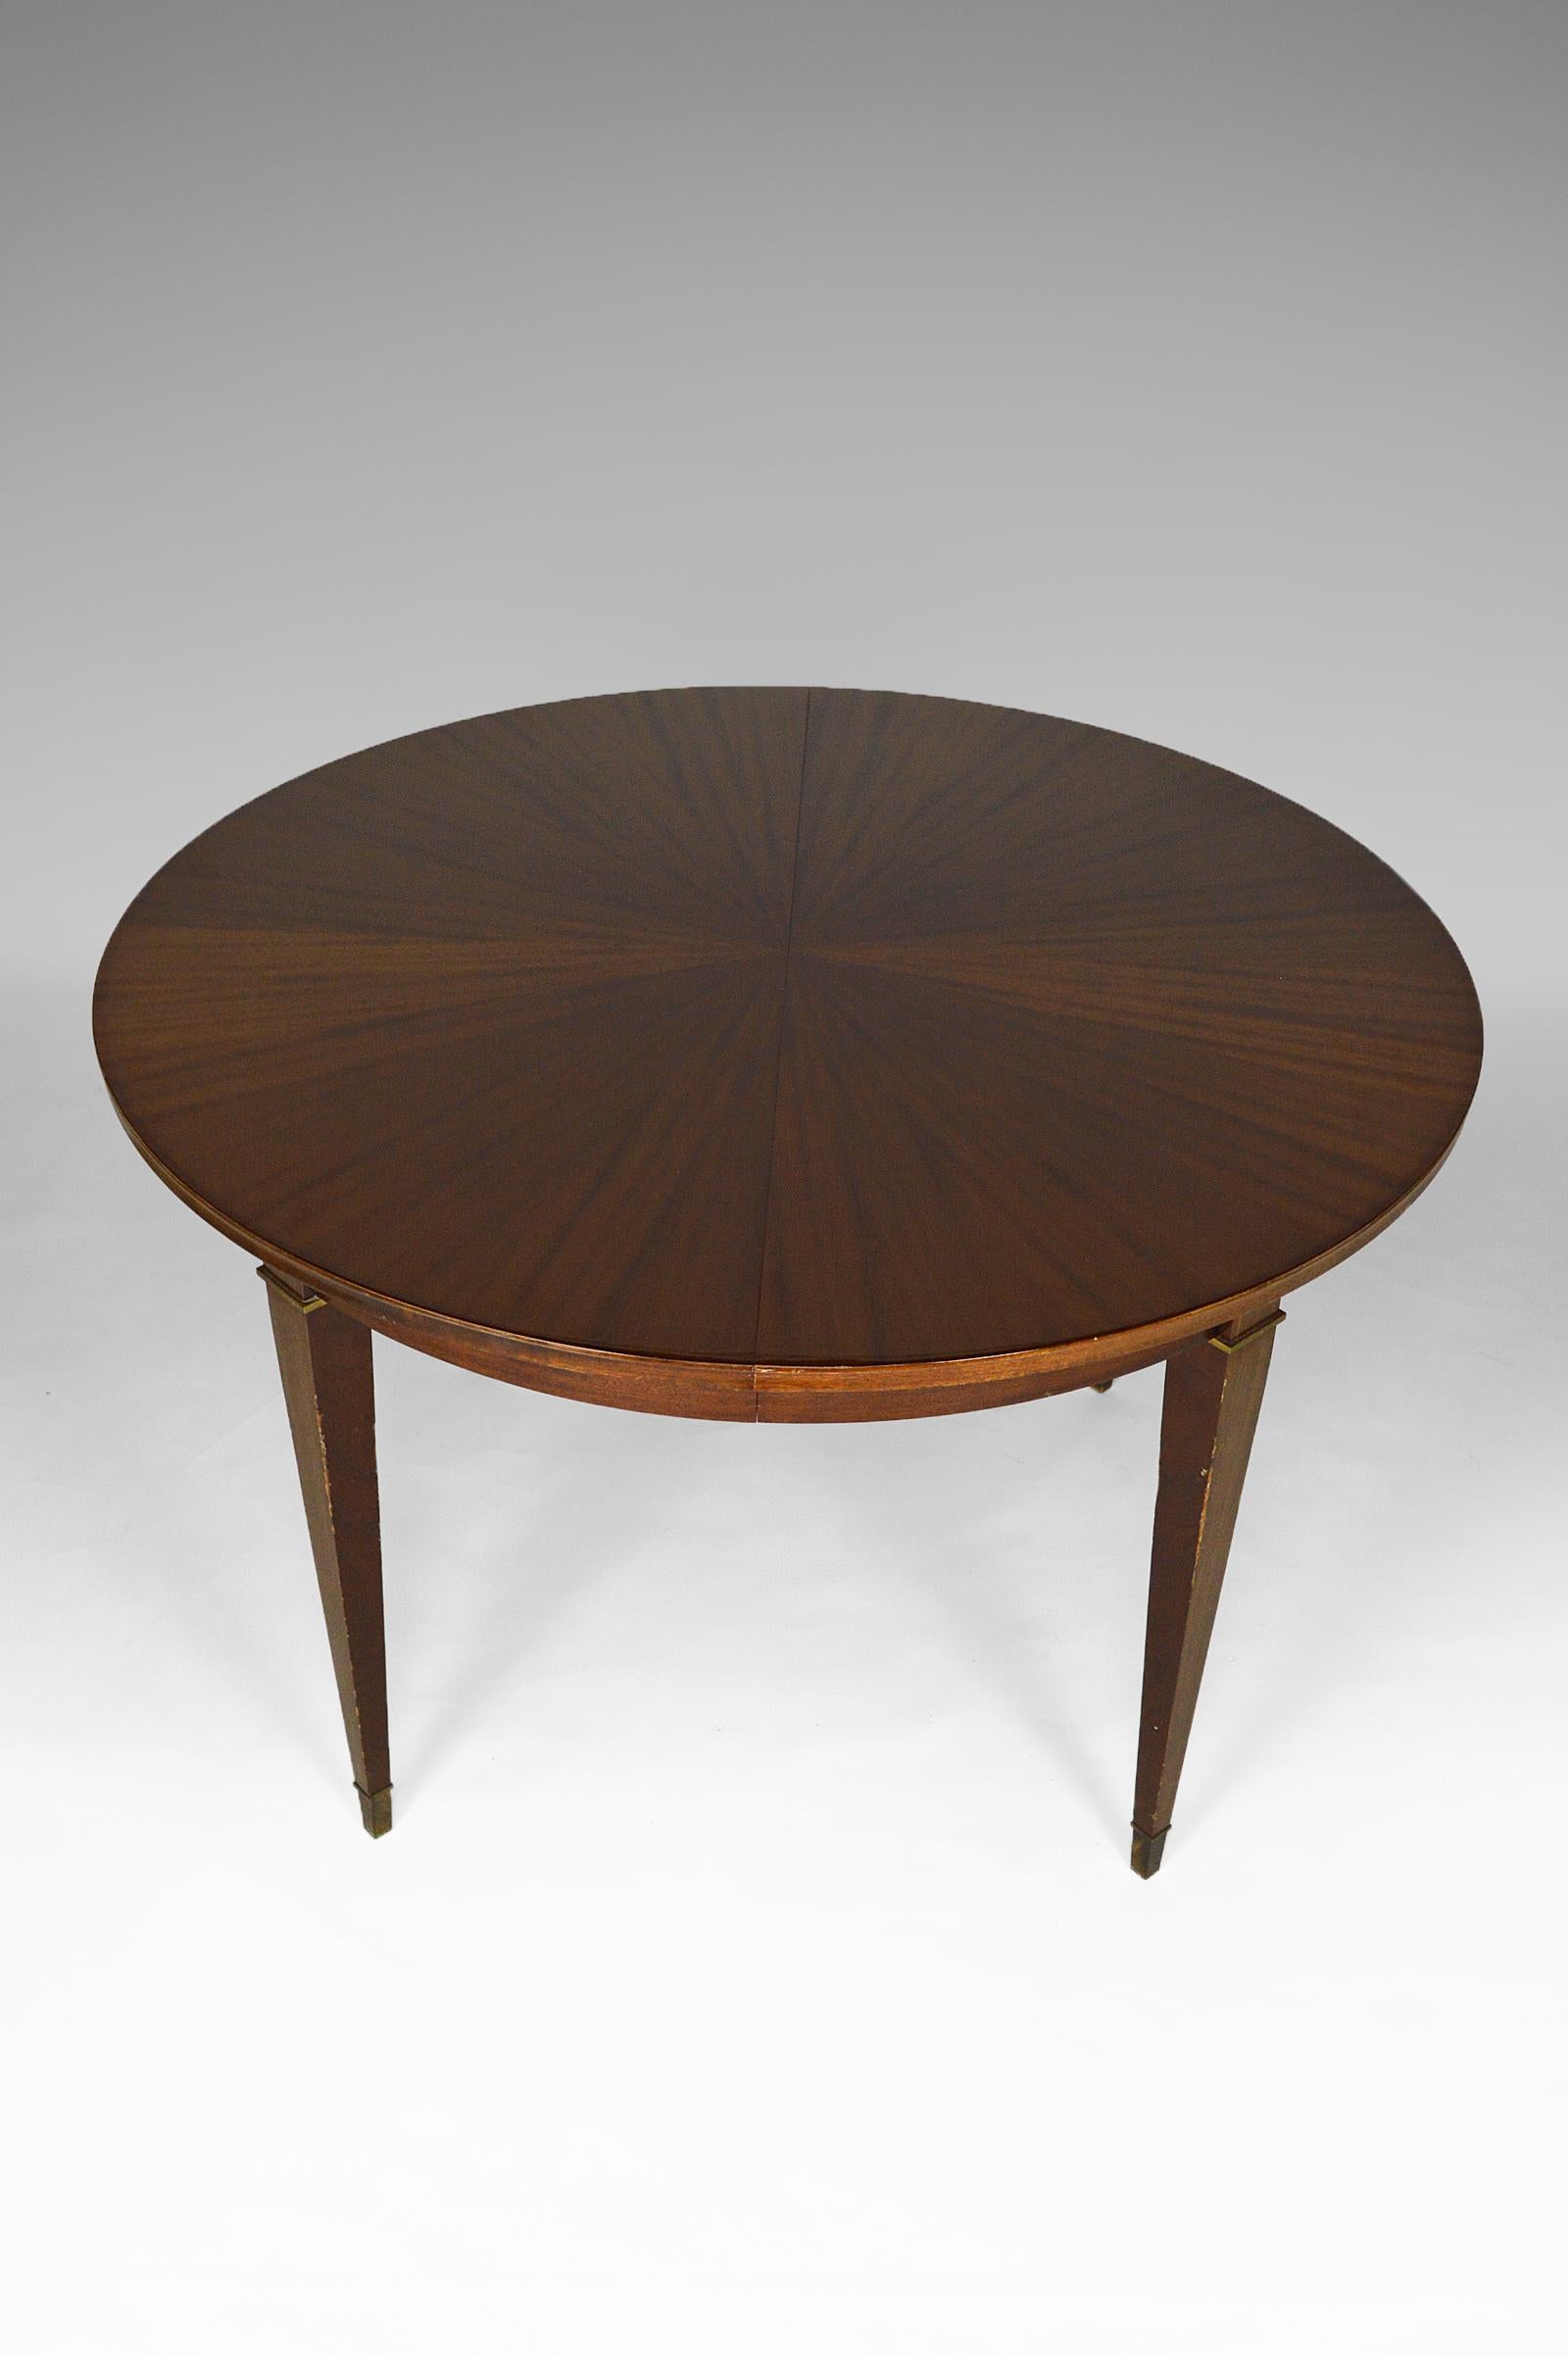 Bronze Art Deco Extendable Round Table in Mahogany, by Jacques Adnet, circa 1940 For Sale